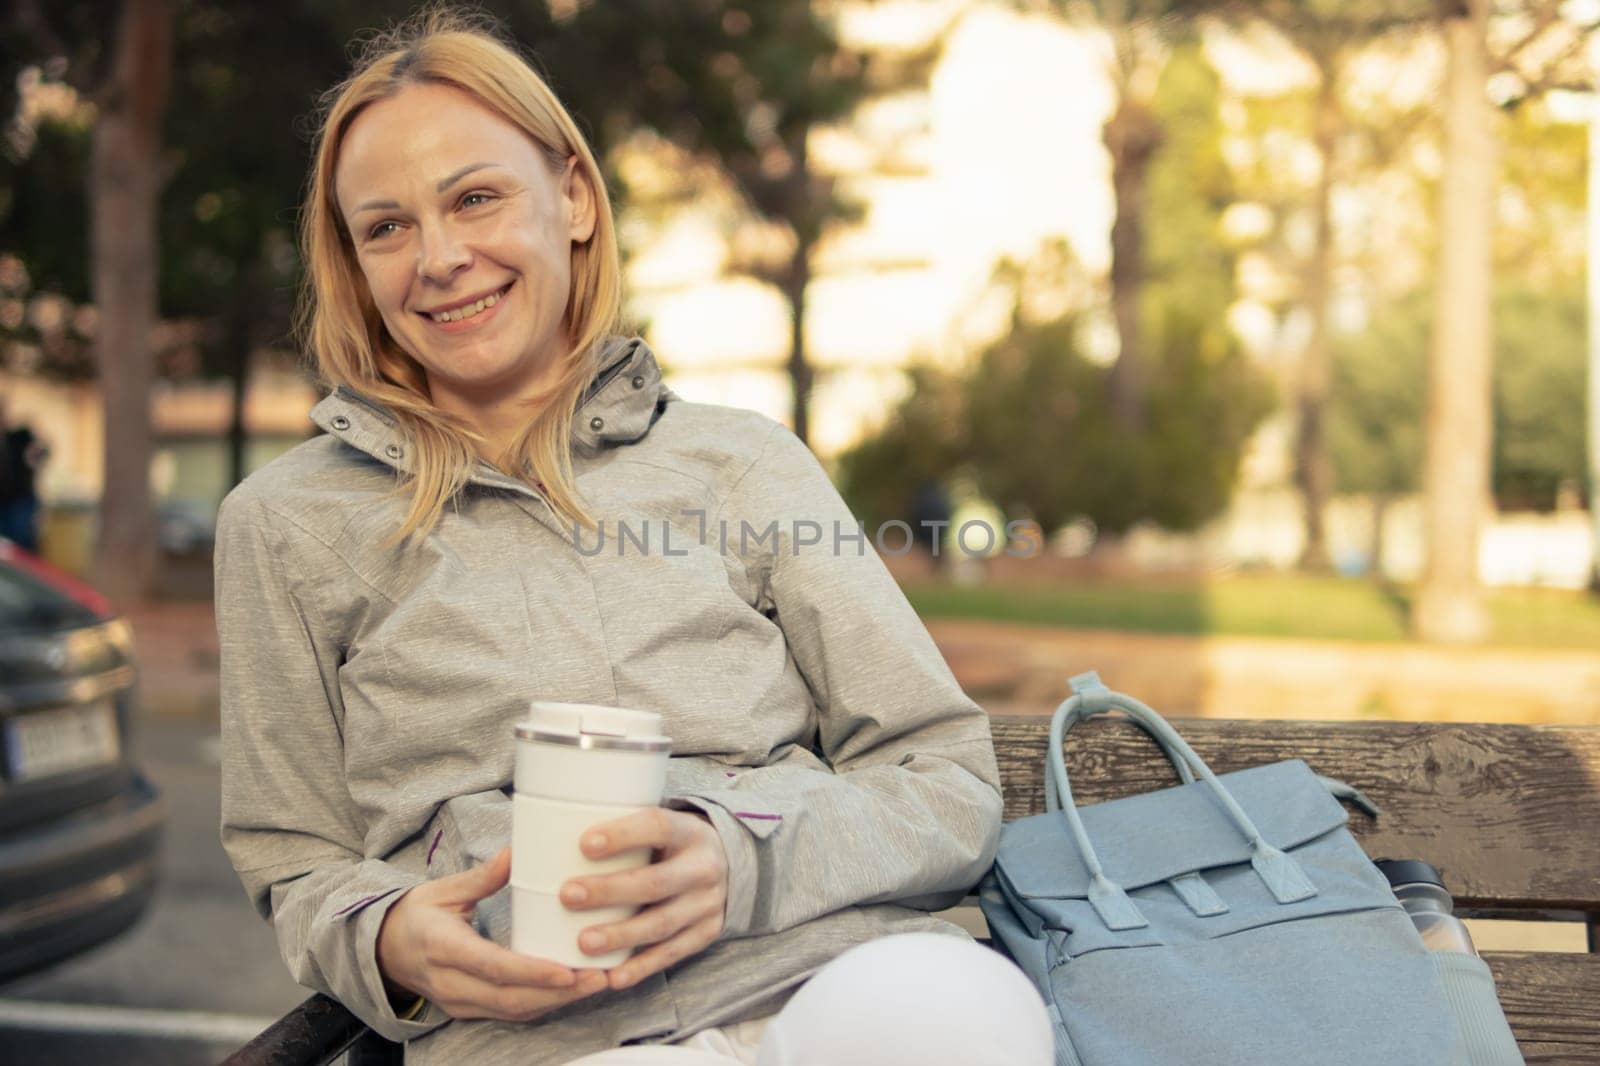 a smiling girl of European appearance with blond hair sits on a bench, drinks coffee from a white thermo mug, a girl sits in a gray jacket, a blue backpack lies nearby. High quality photo